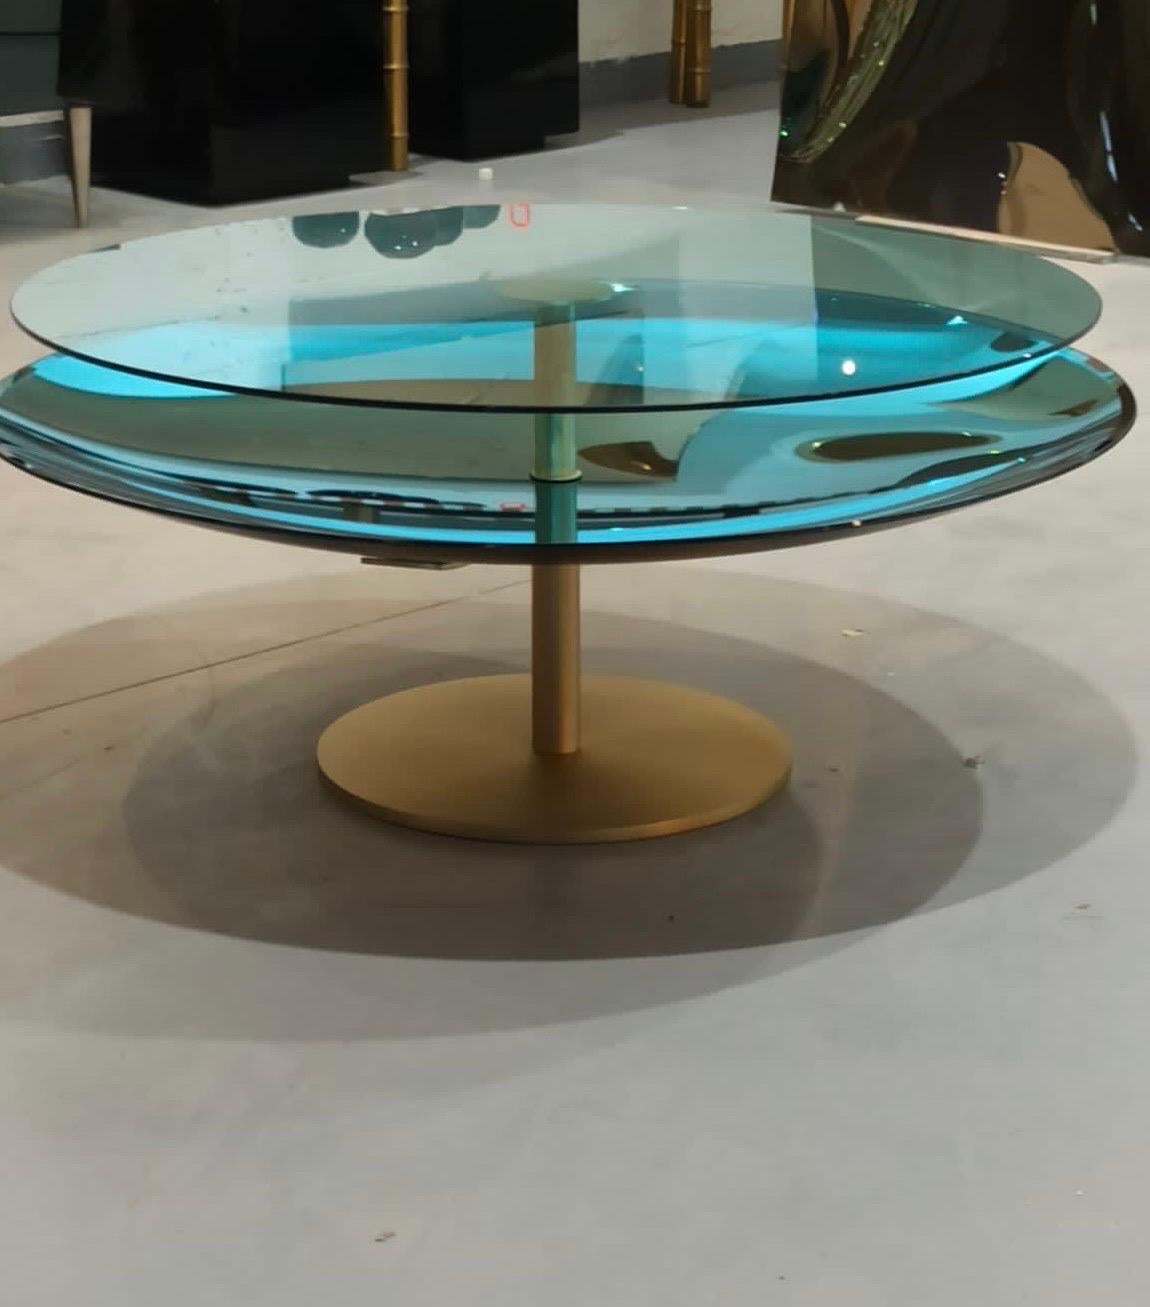 This amazing two tier coffee table consists of hand blown turquoise concave mirrored glass at the bottom and flat light blue clear glass on top supported by a solid brass structure. The table is produced by master glass blowers in Milan .
It’s